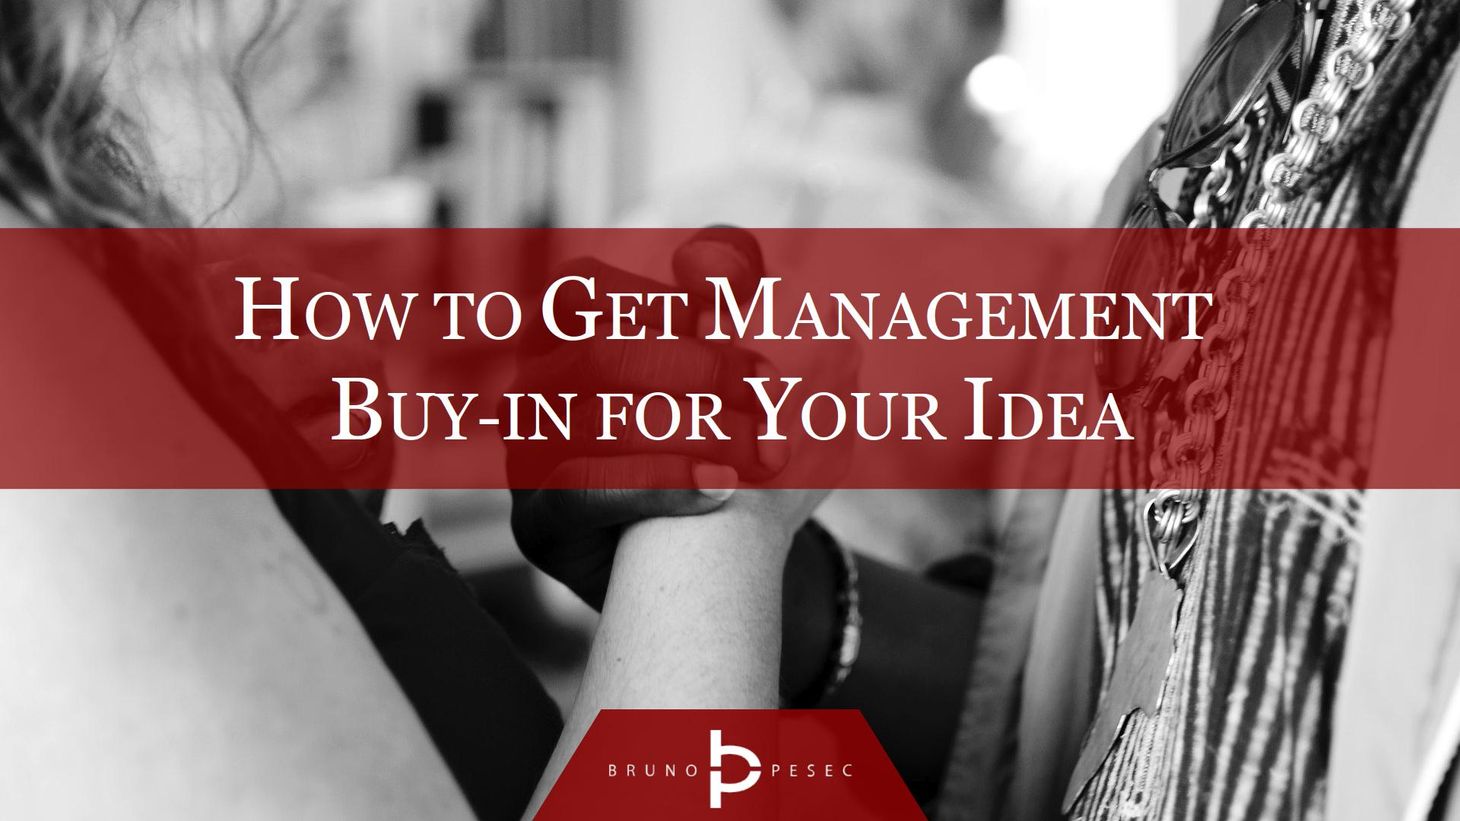 How to get management buy-in for your idea